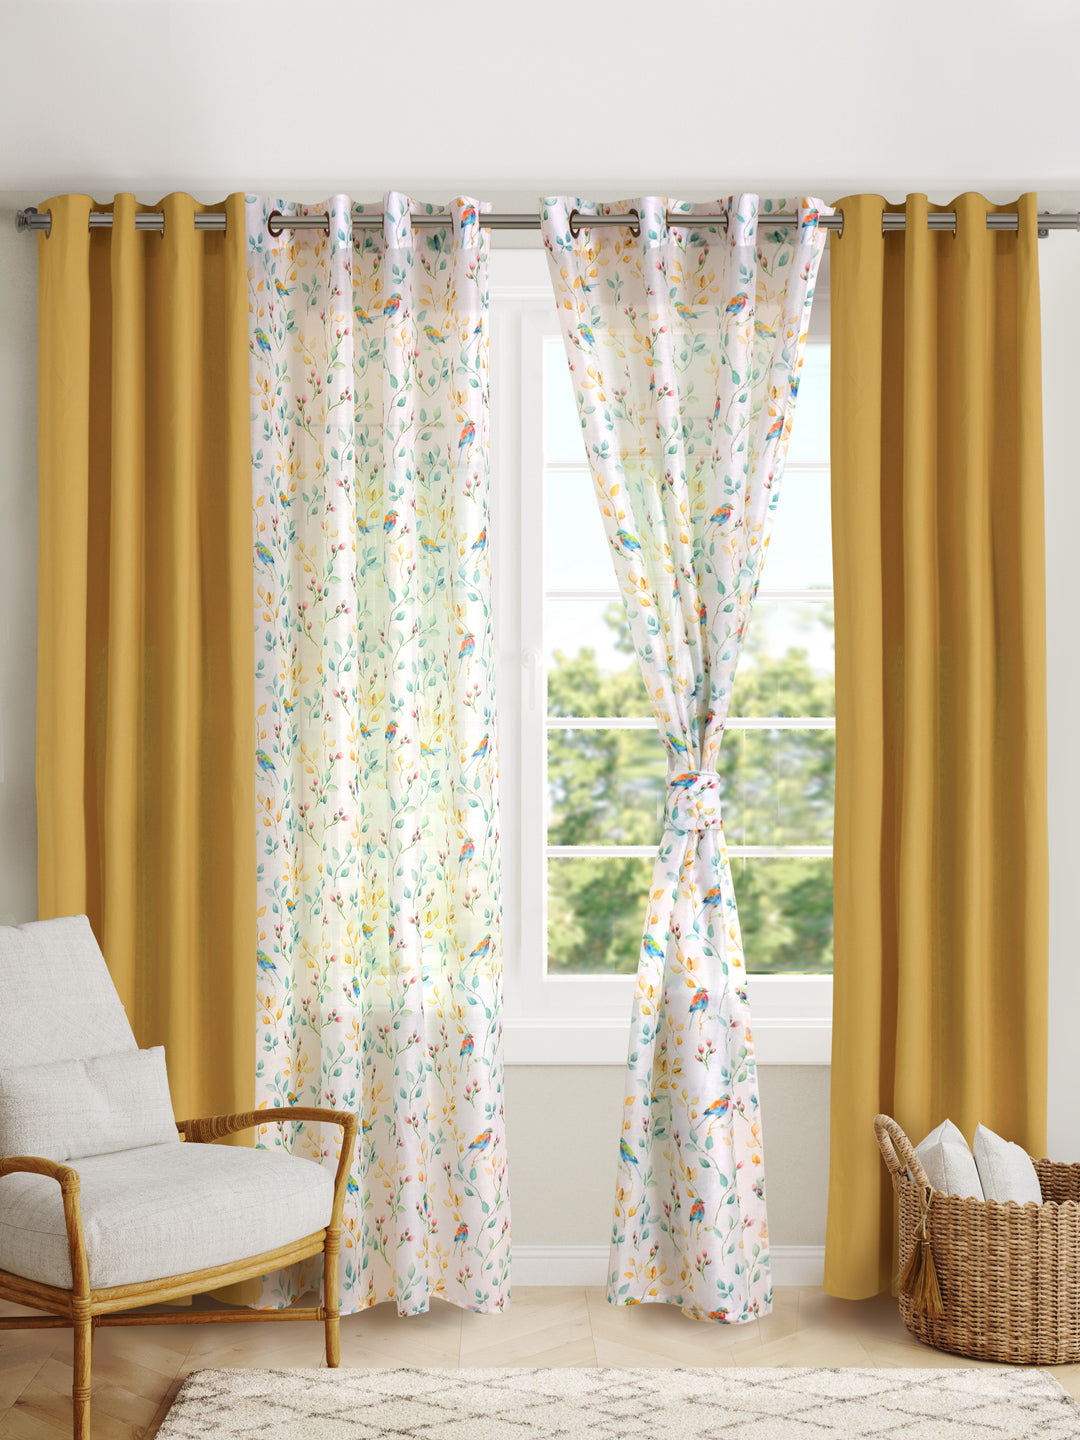 Blanc9 Set Of 4 Fauna Printed With Mustard Plain 7Ft. Curtains